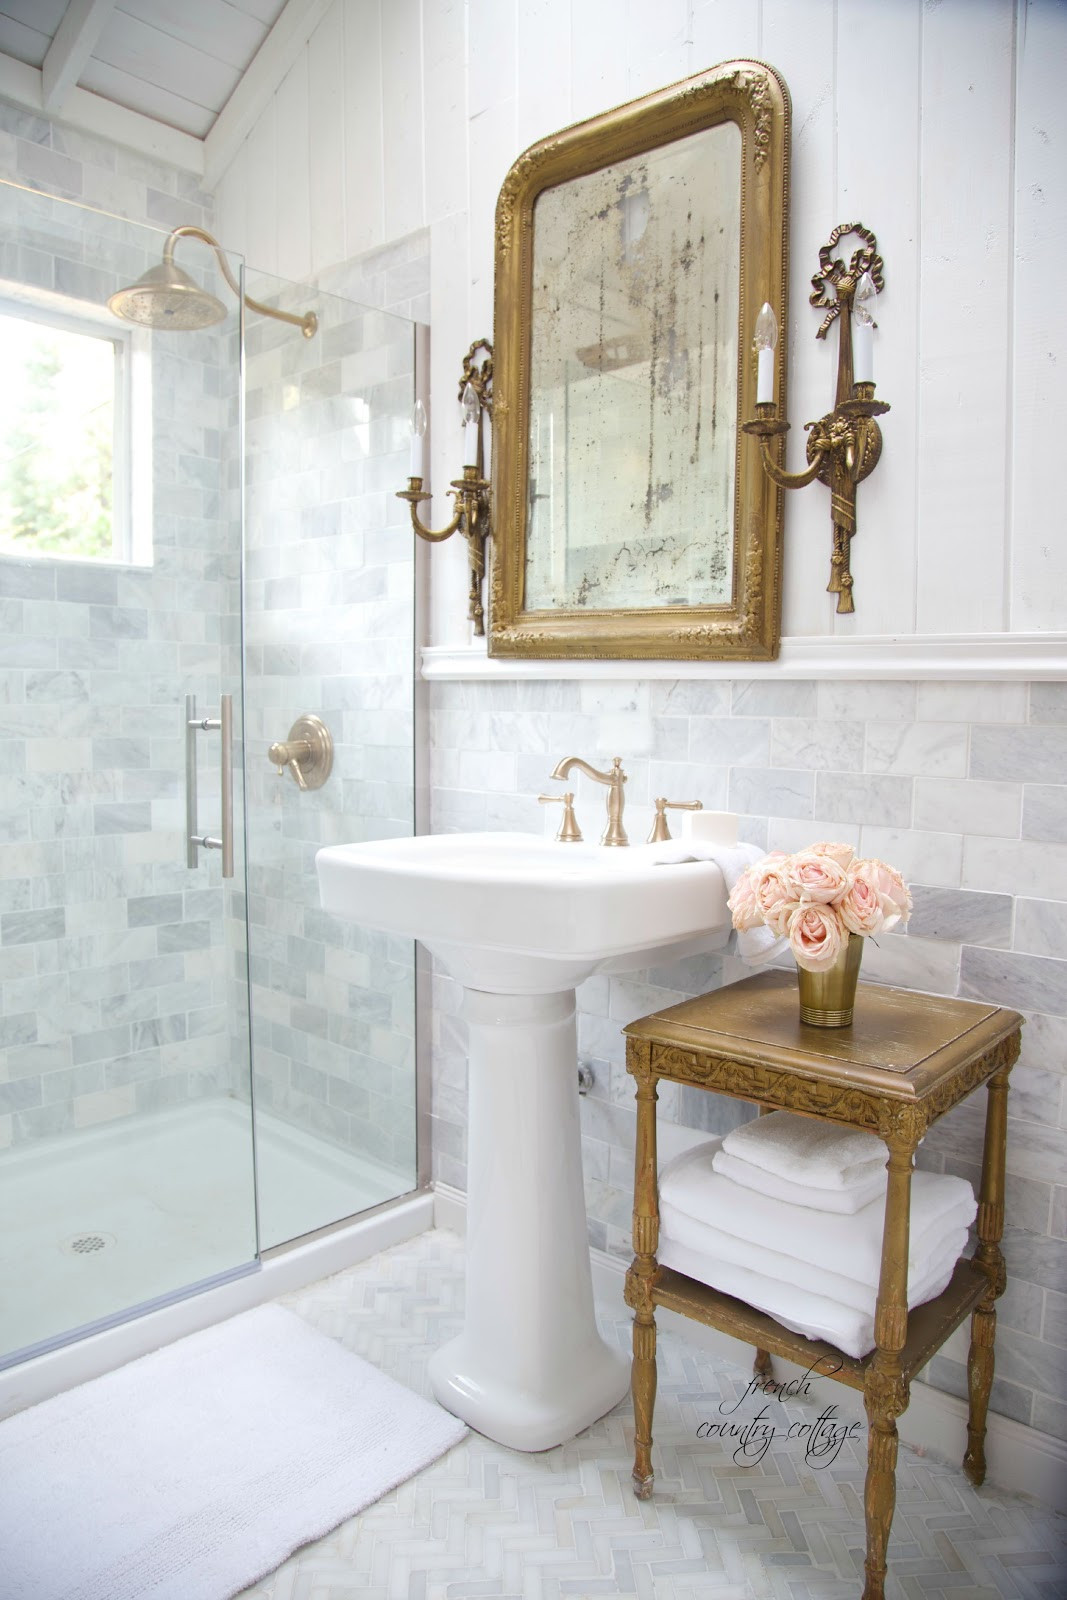 Country Bathroom Sinks
 Details The perfect pedestal sink FRENCH COUNTRY COTTAGE